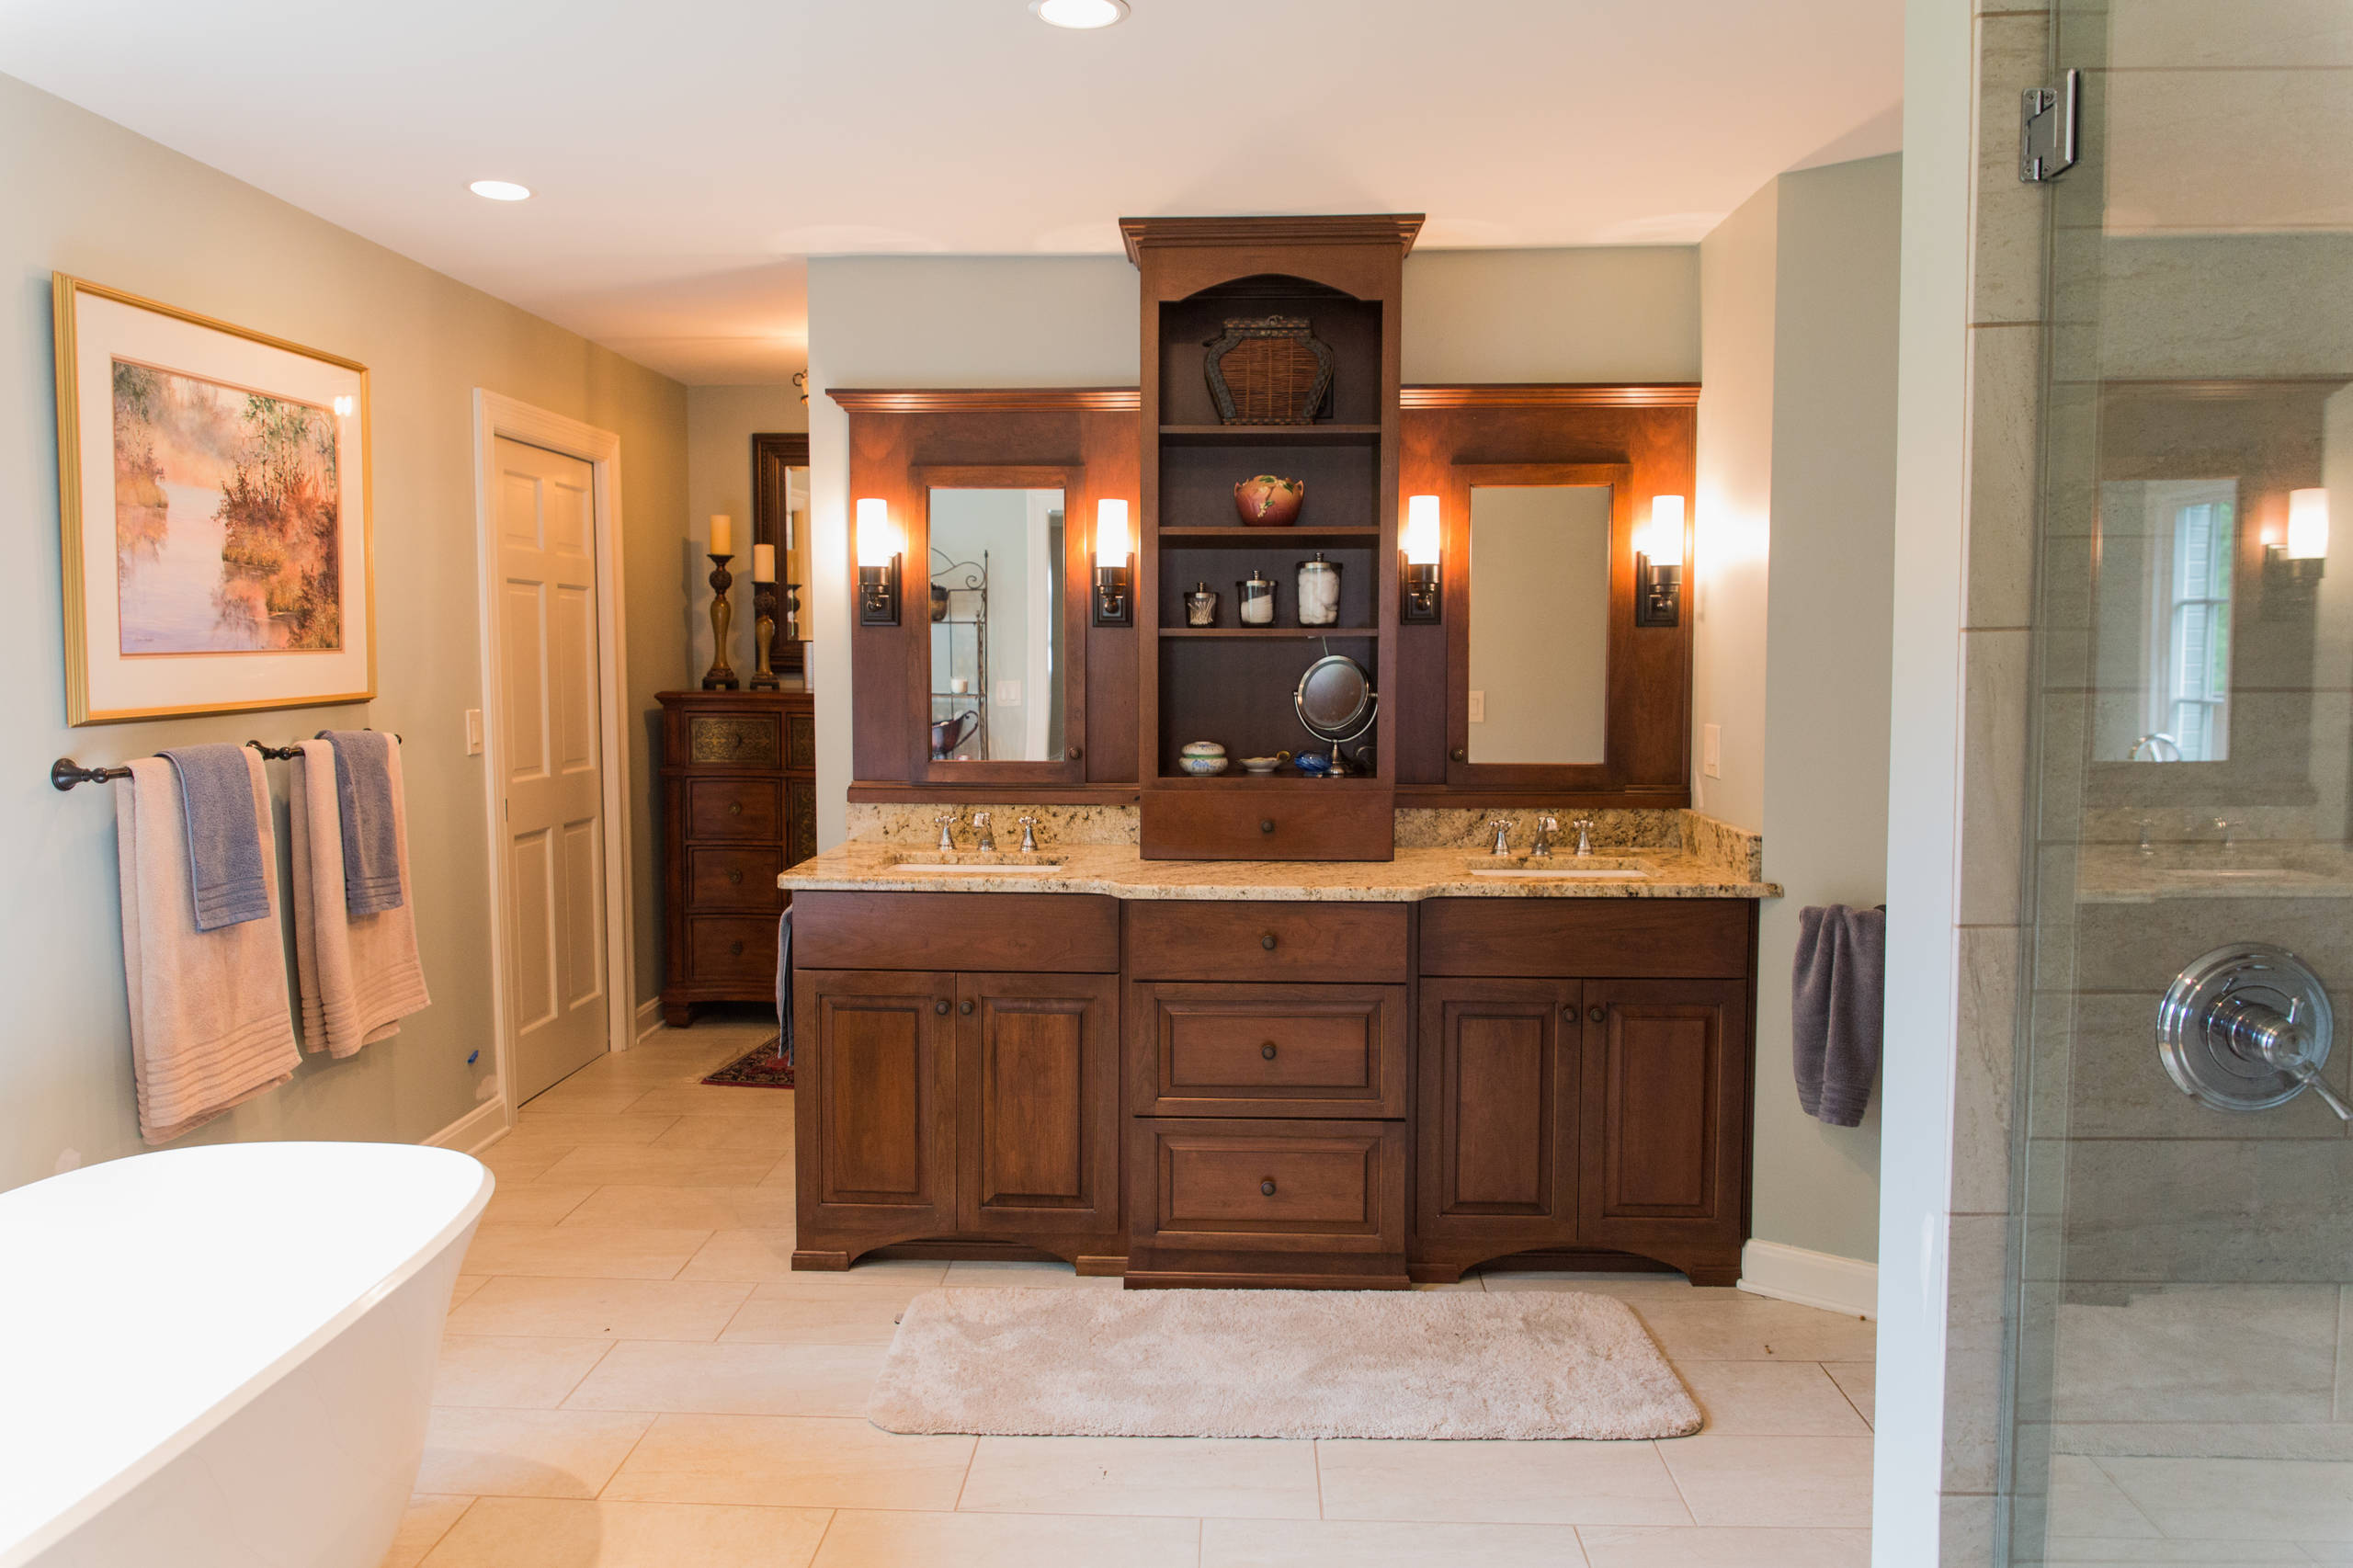 Double Vanity With Center Tower - Photos & Ideas | Houzz